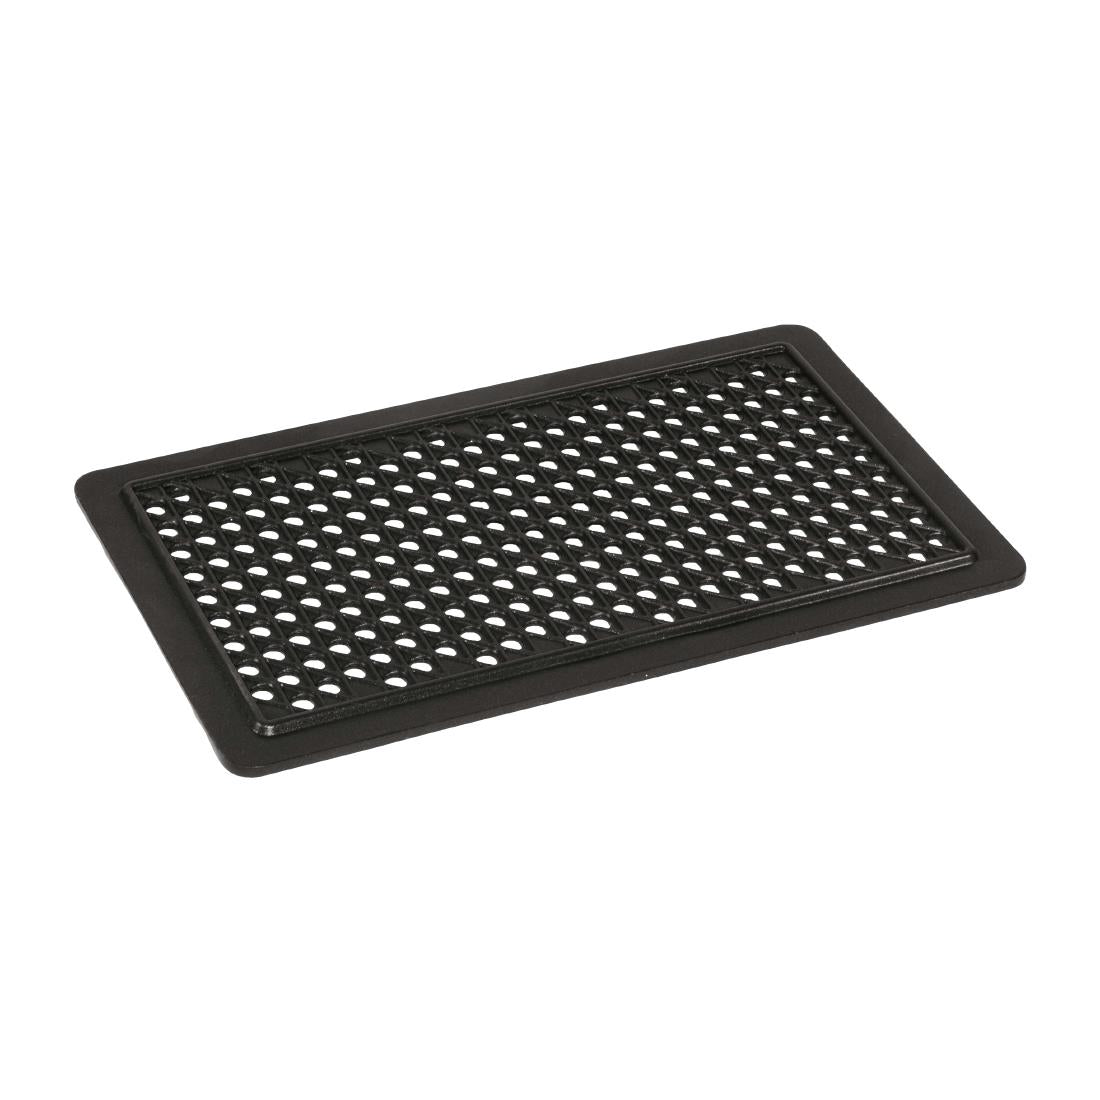 CH103 AMT Gastroguss Perforated BBQ Grill Gastronorm Grate 1/1 JD Catering Equipment Solutions Ltd